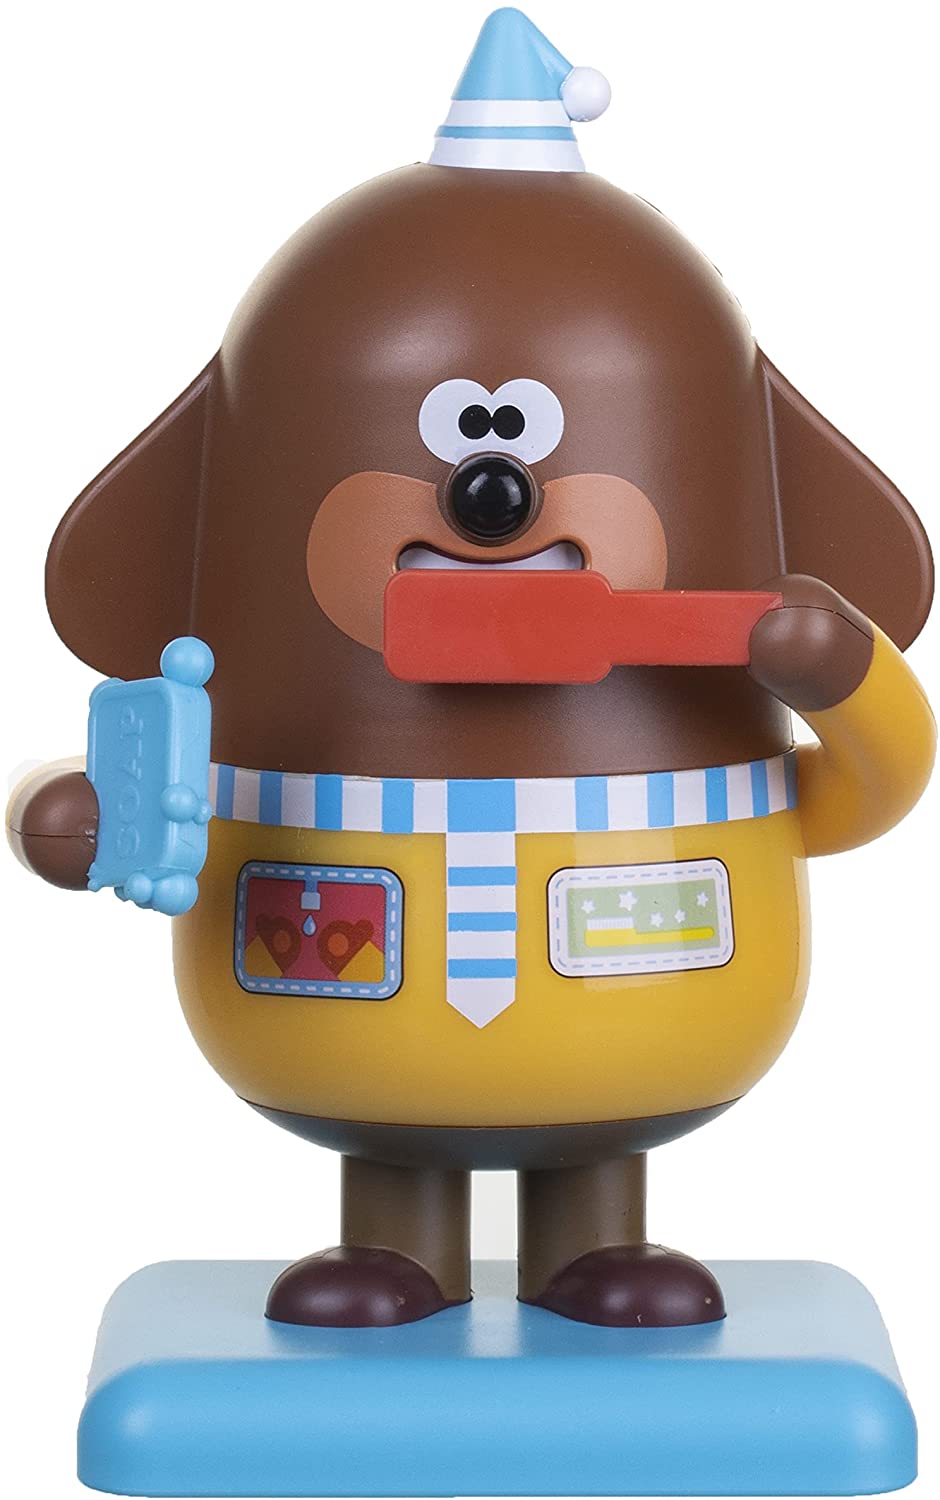 Hey Duggee 539 2146 EA Toothbrush and Handwashing Time with Duggee, Brown